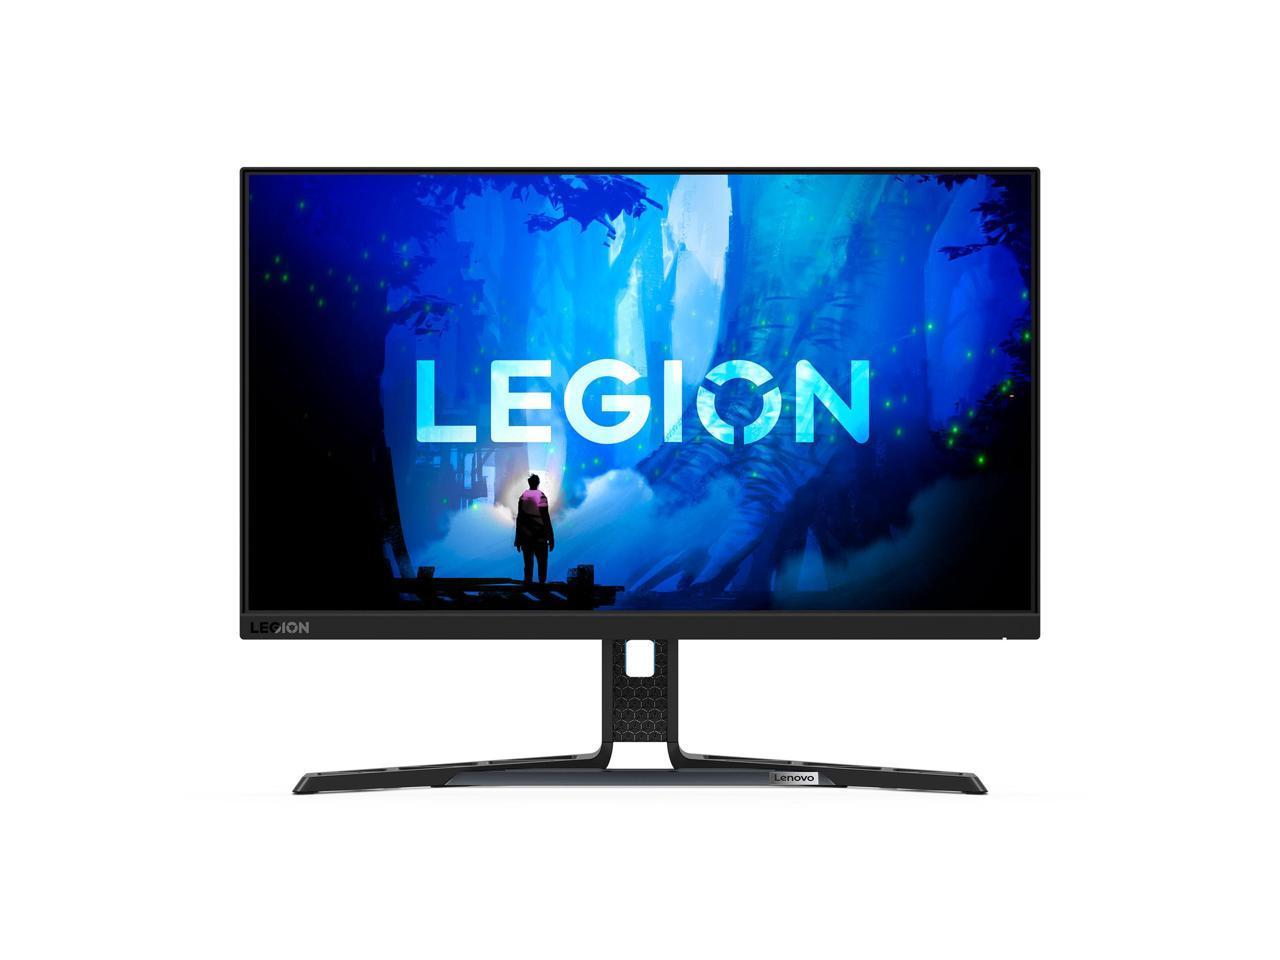 Lenovo Y25-30 24.5" Full HD 240Hz (Overclock to 280Hz) Monitor WLED Gaming LCD M - $530.99